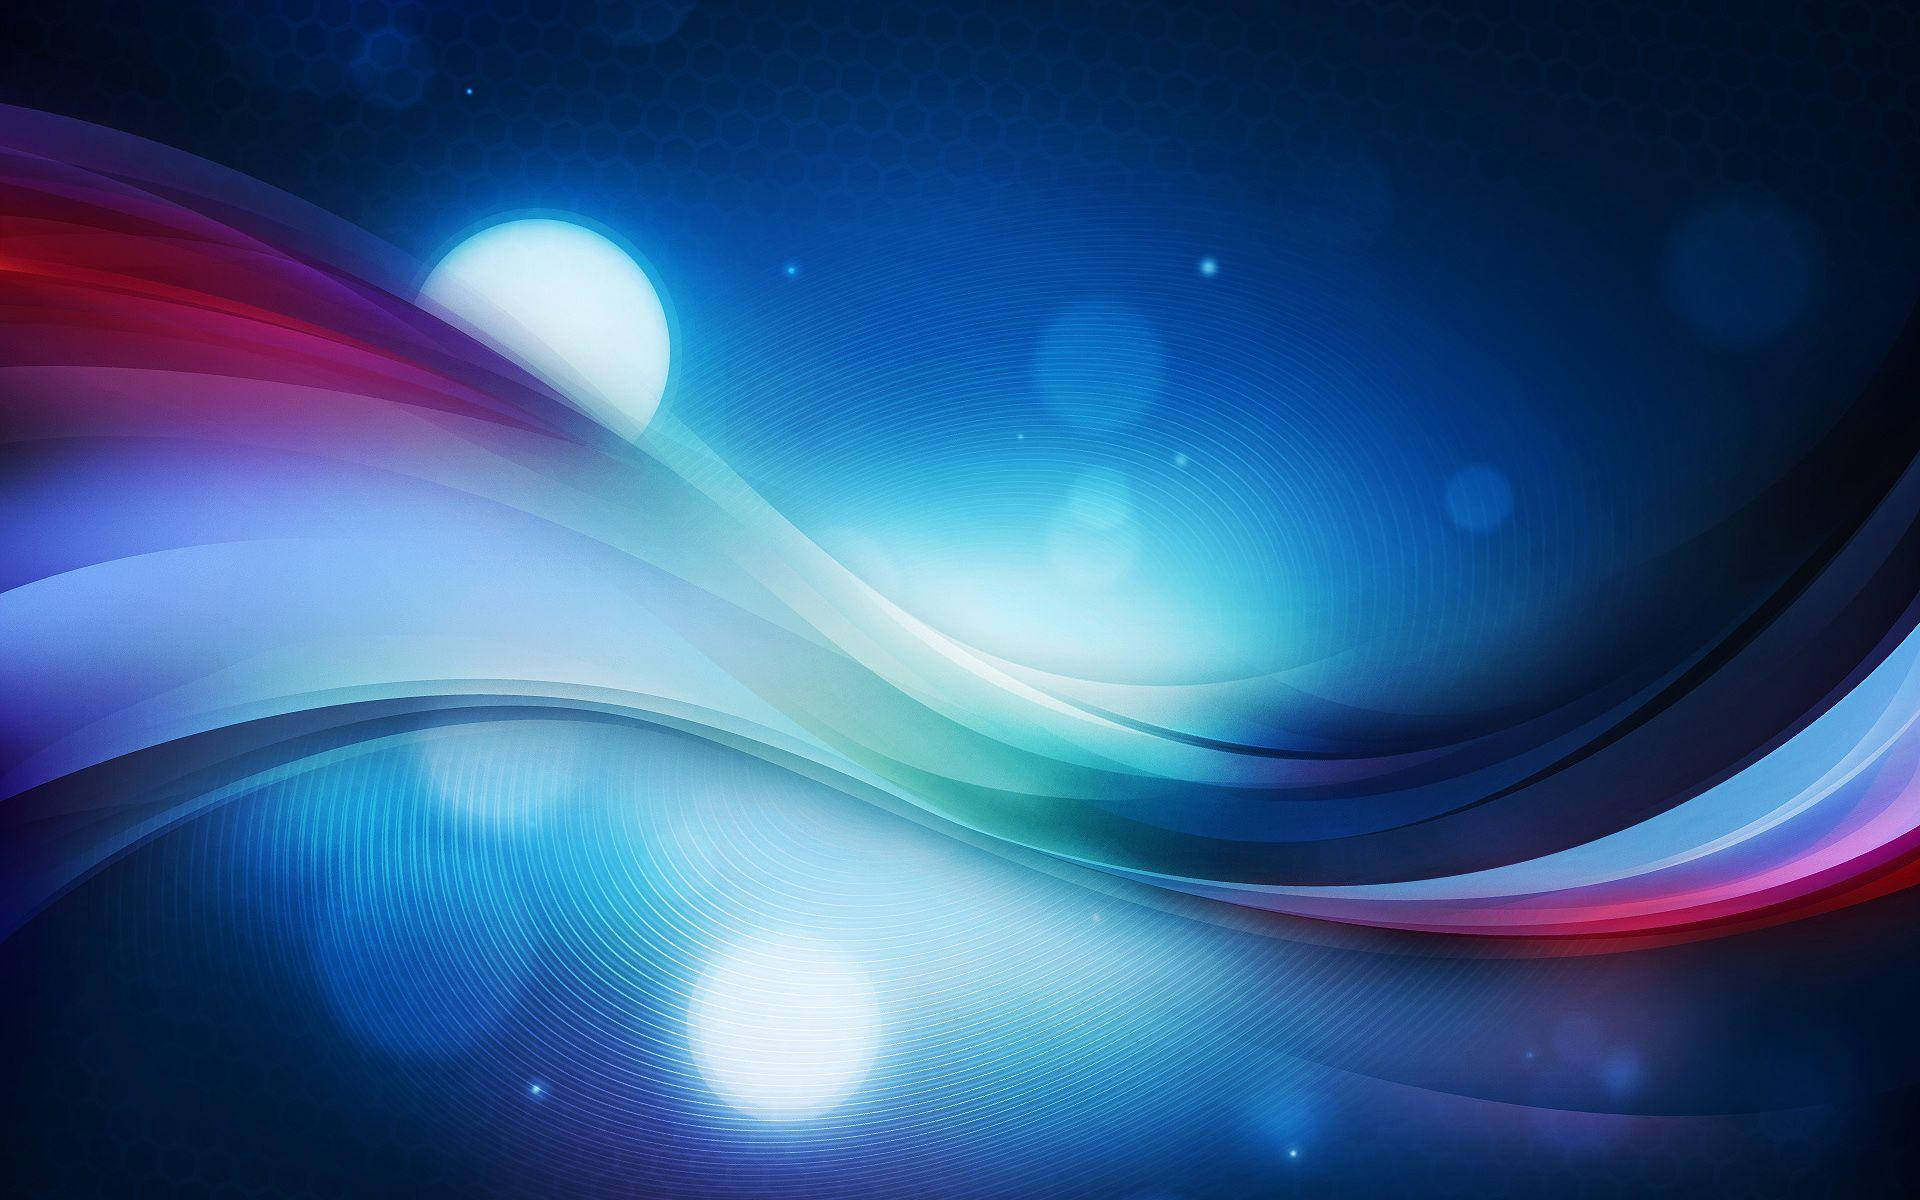 Abstract Spectrum Curve Graphic Background